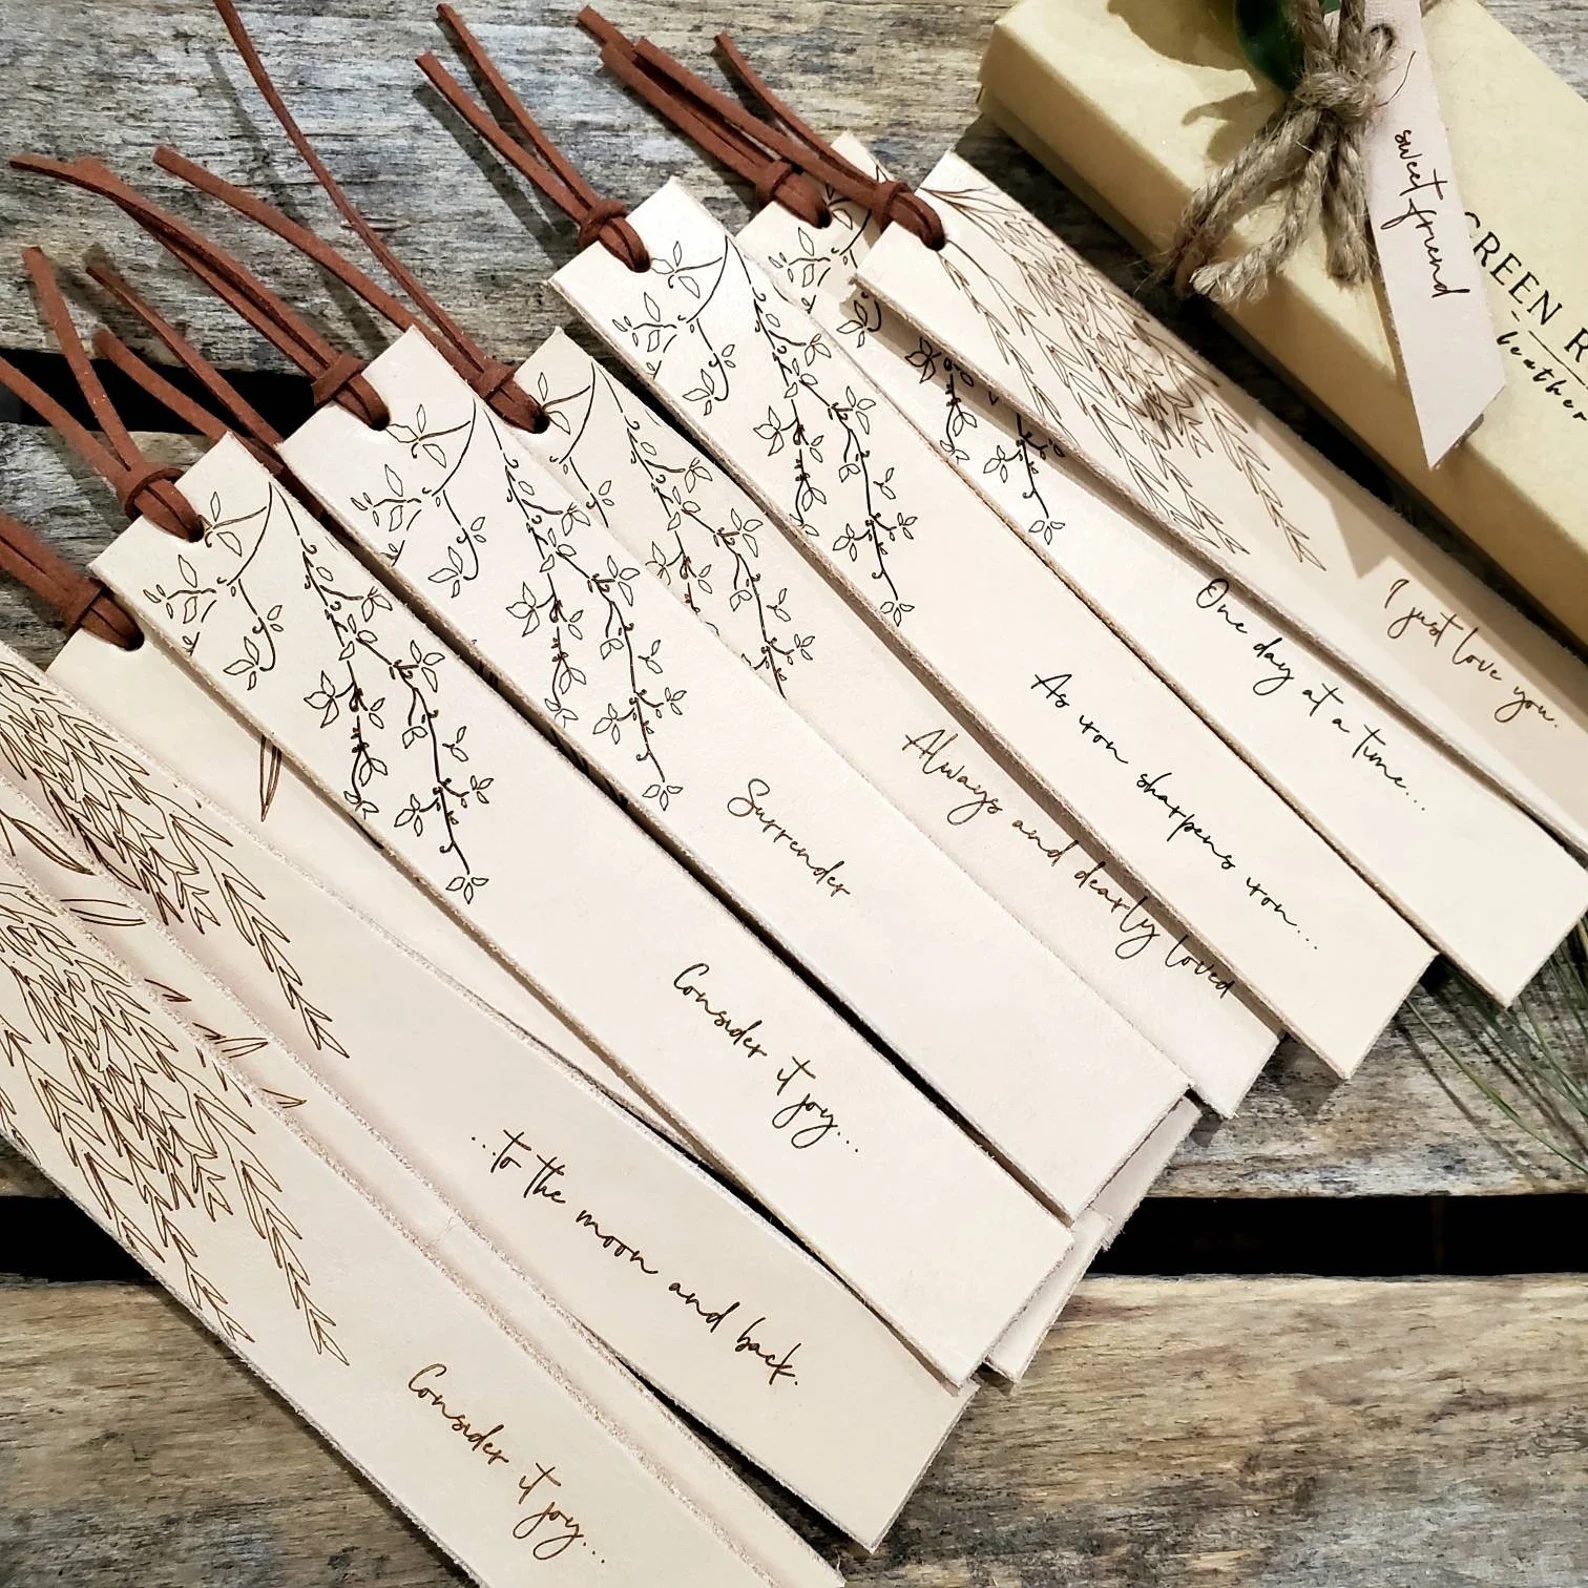 a photo of about a dozen leather book marks with tree-like patterns on them